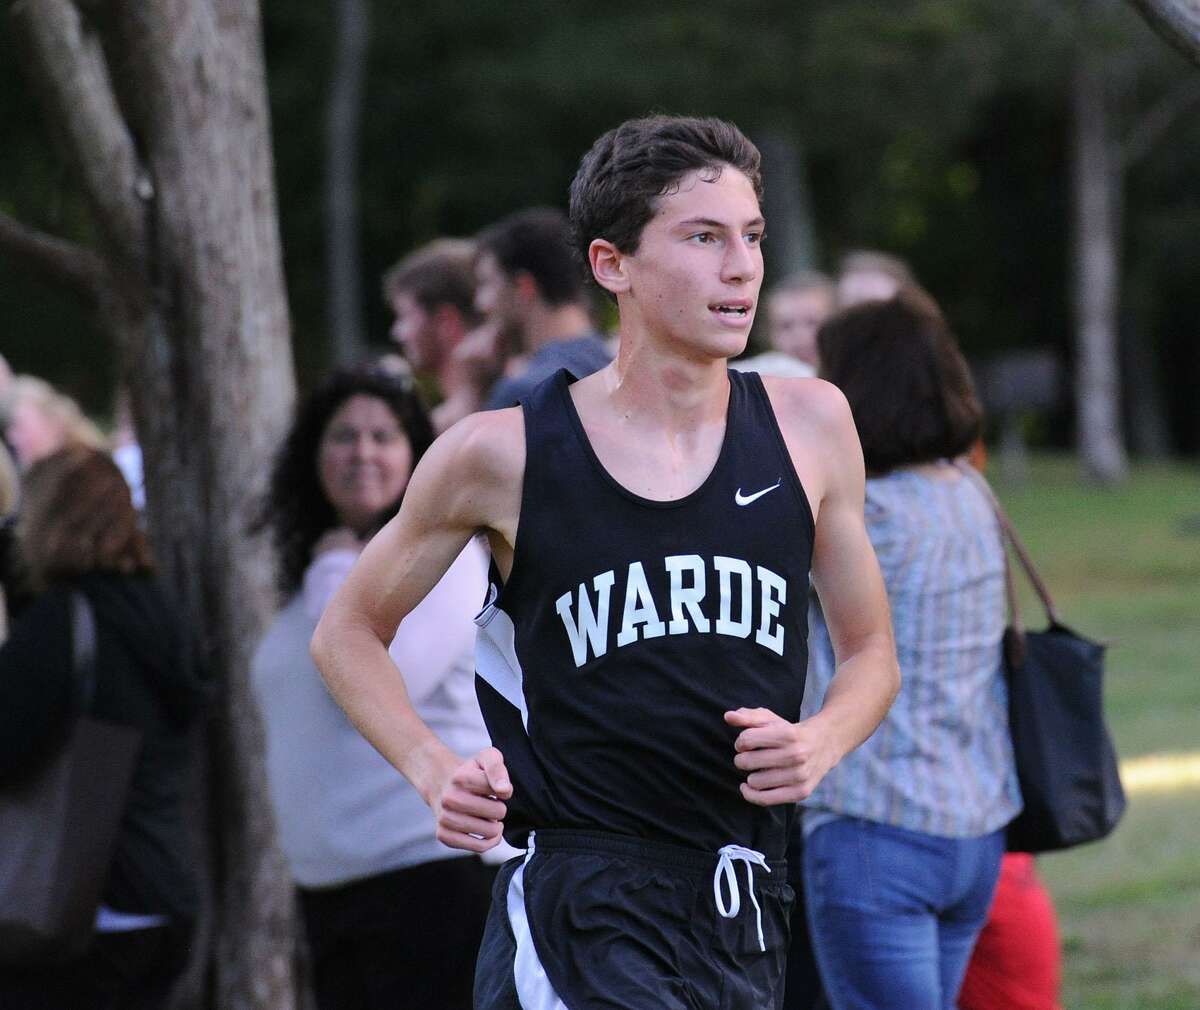 Warde’s Will Brisman, who won the 3,200-meter races in the FCIAC indoor championship, the Class LL meet and the State Open meet and finished second by one second in the New England Interscholastic Indoor Track and Field championships, is ready to led the Mustangs to outdoor success.